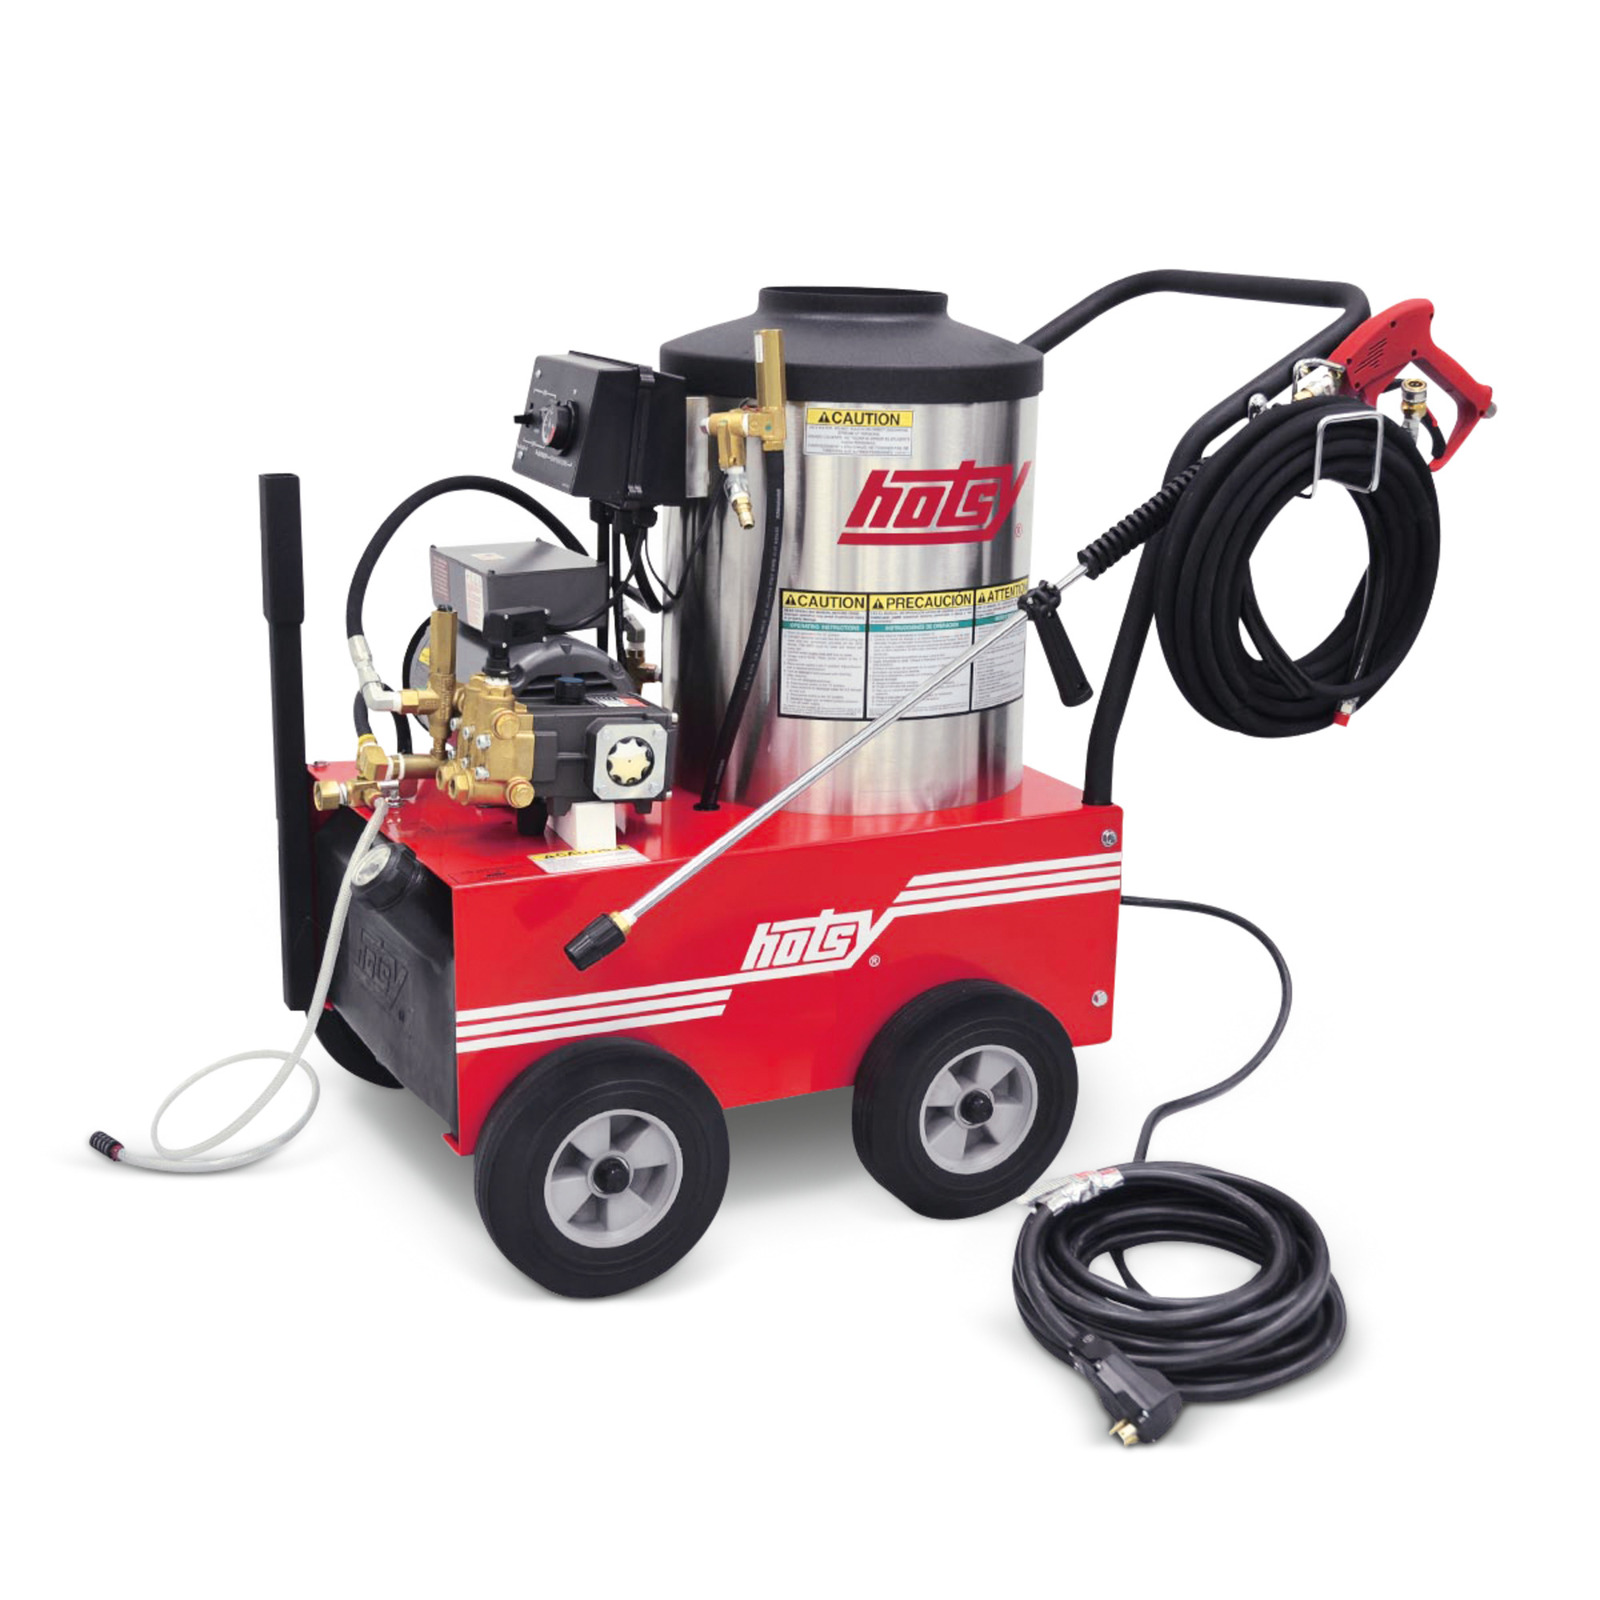 Hot Water Power Washer